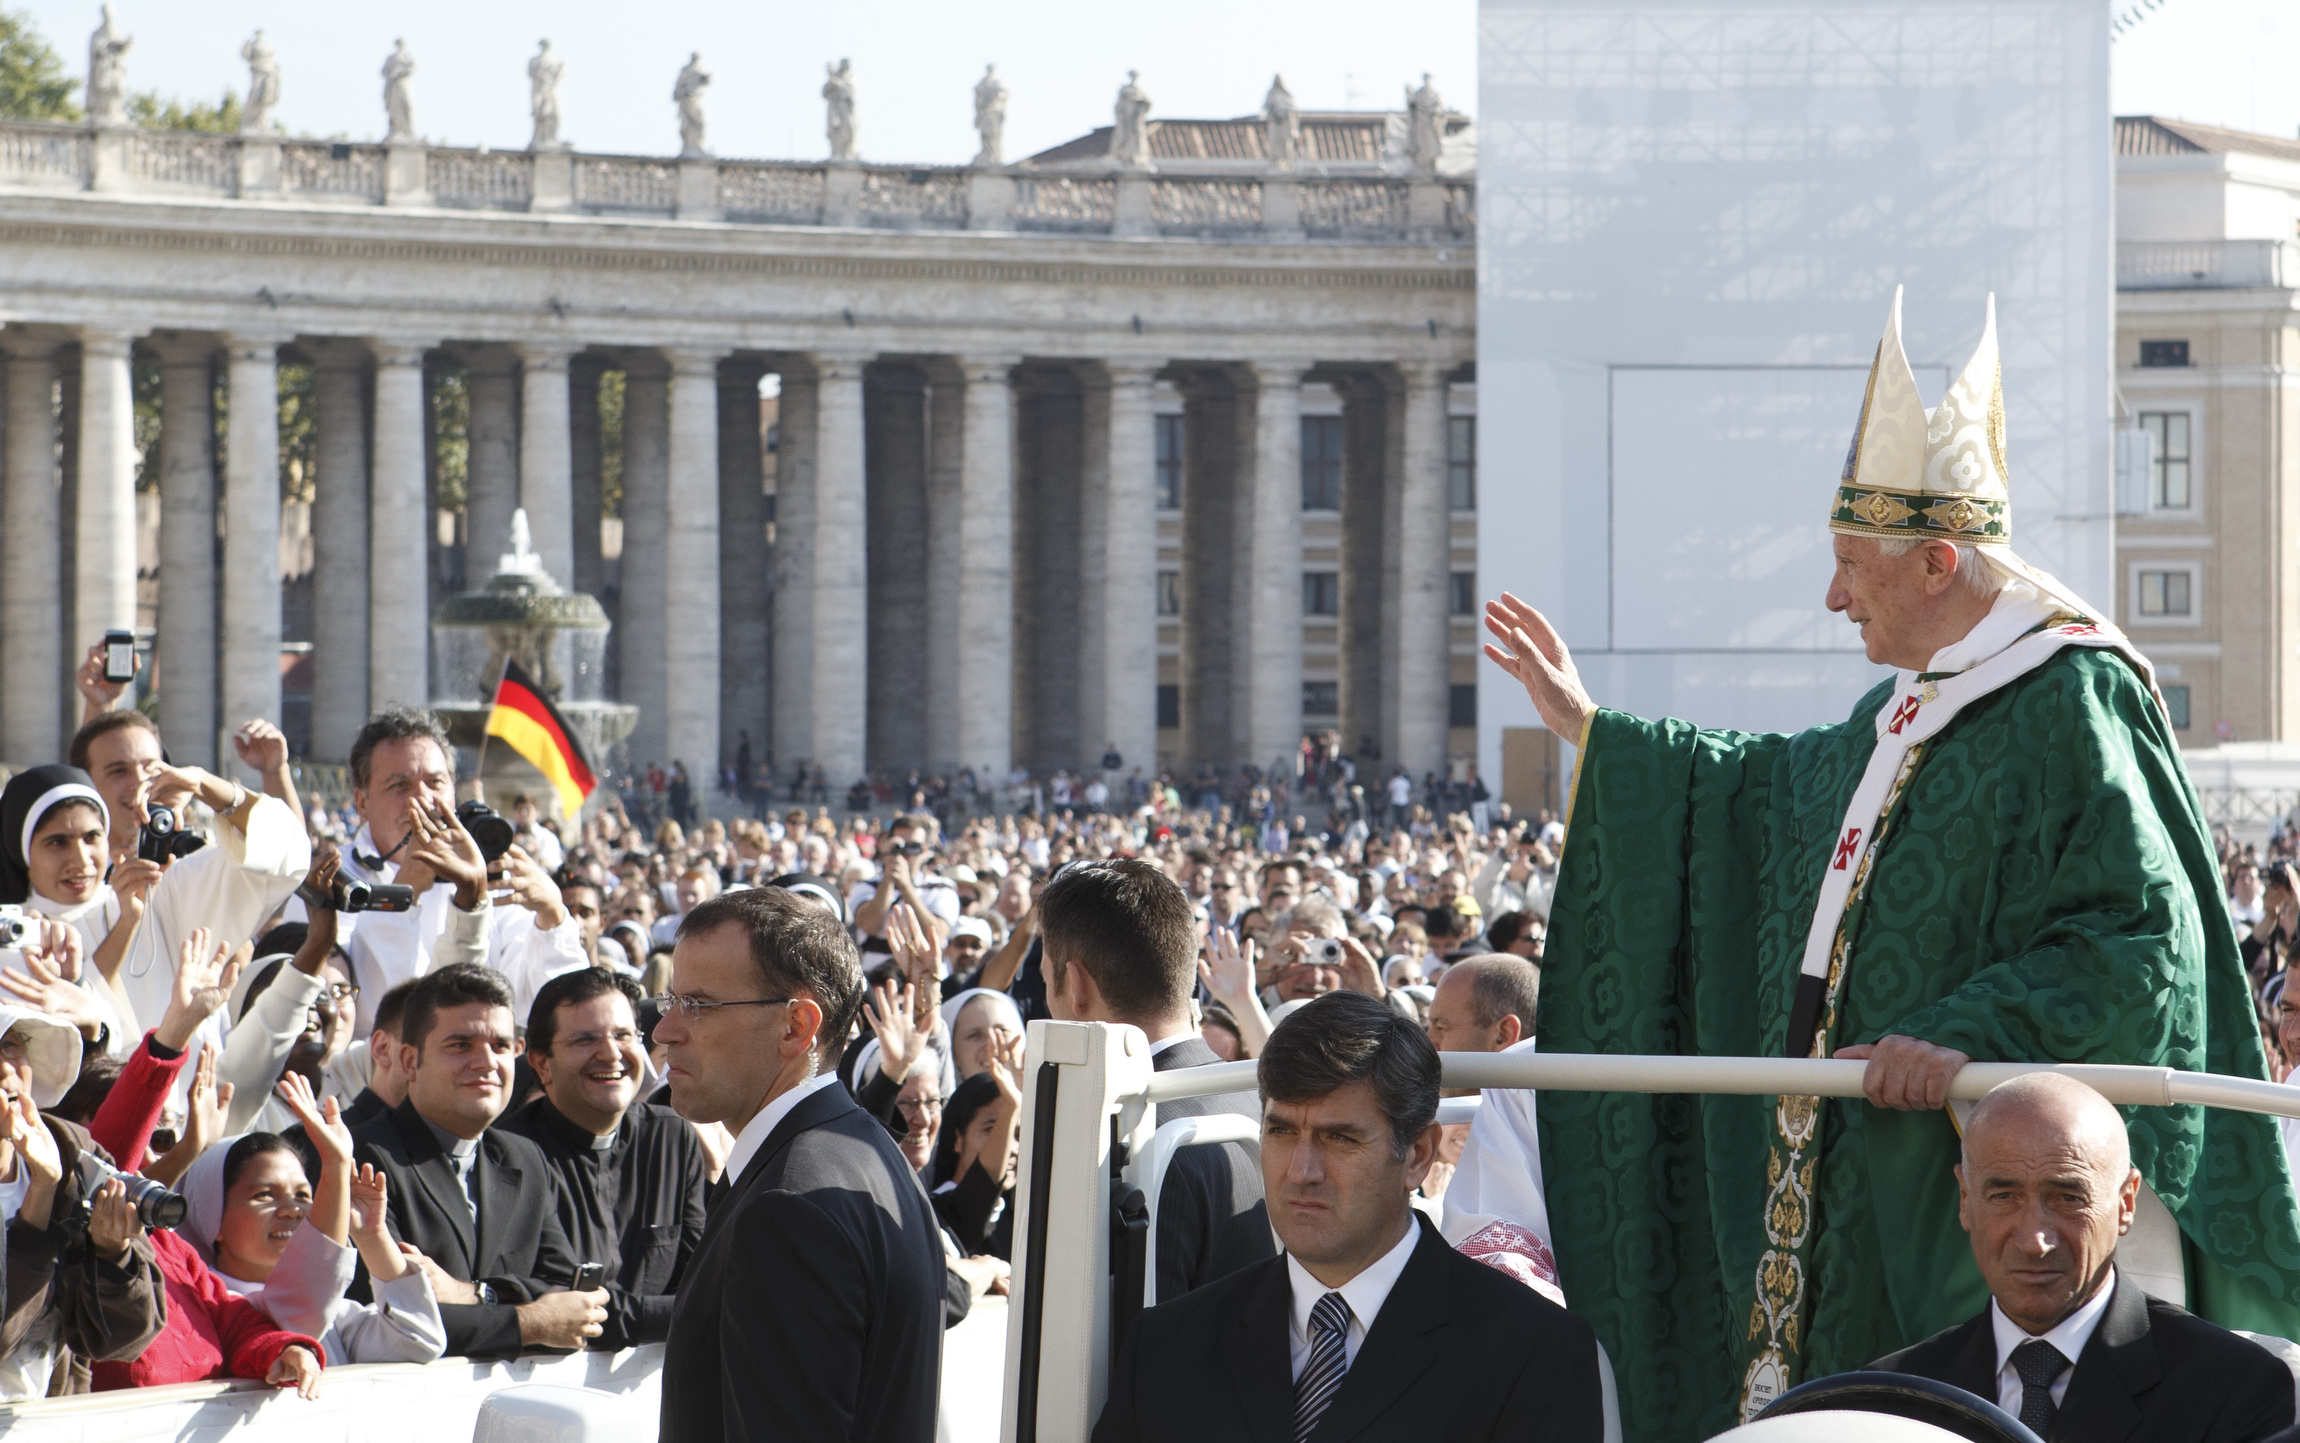 Pope Benedict XVI in open-air jeep before a Mass in St. Peter's Square on Oct. 11, 2012